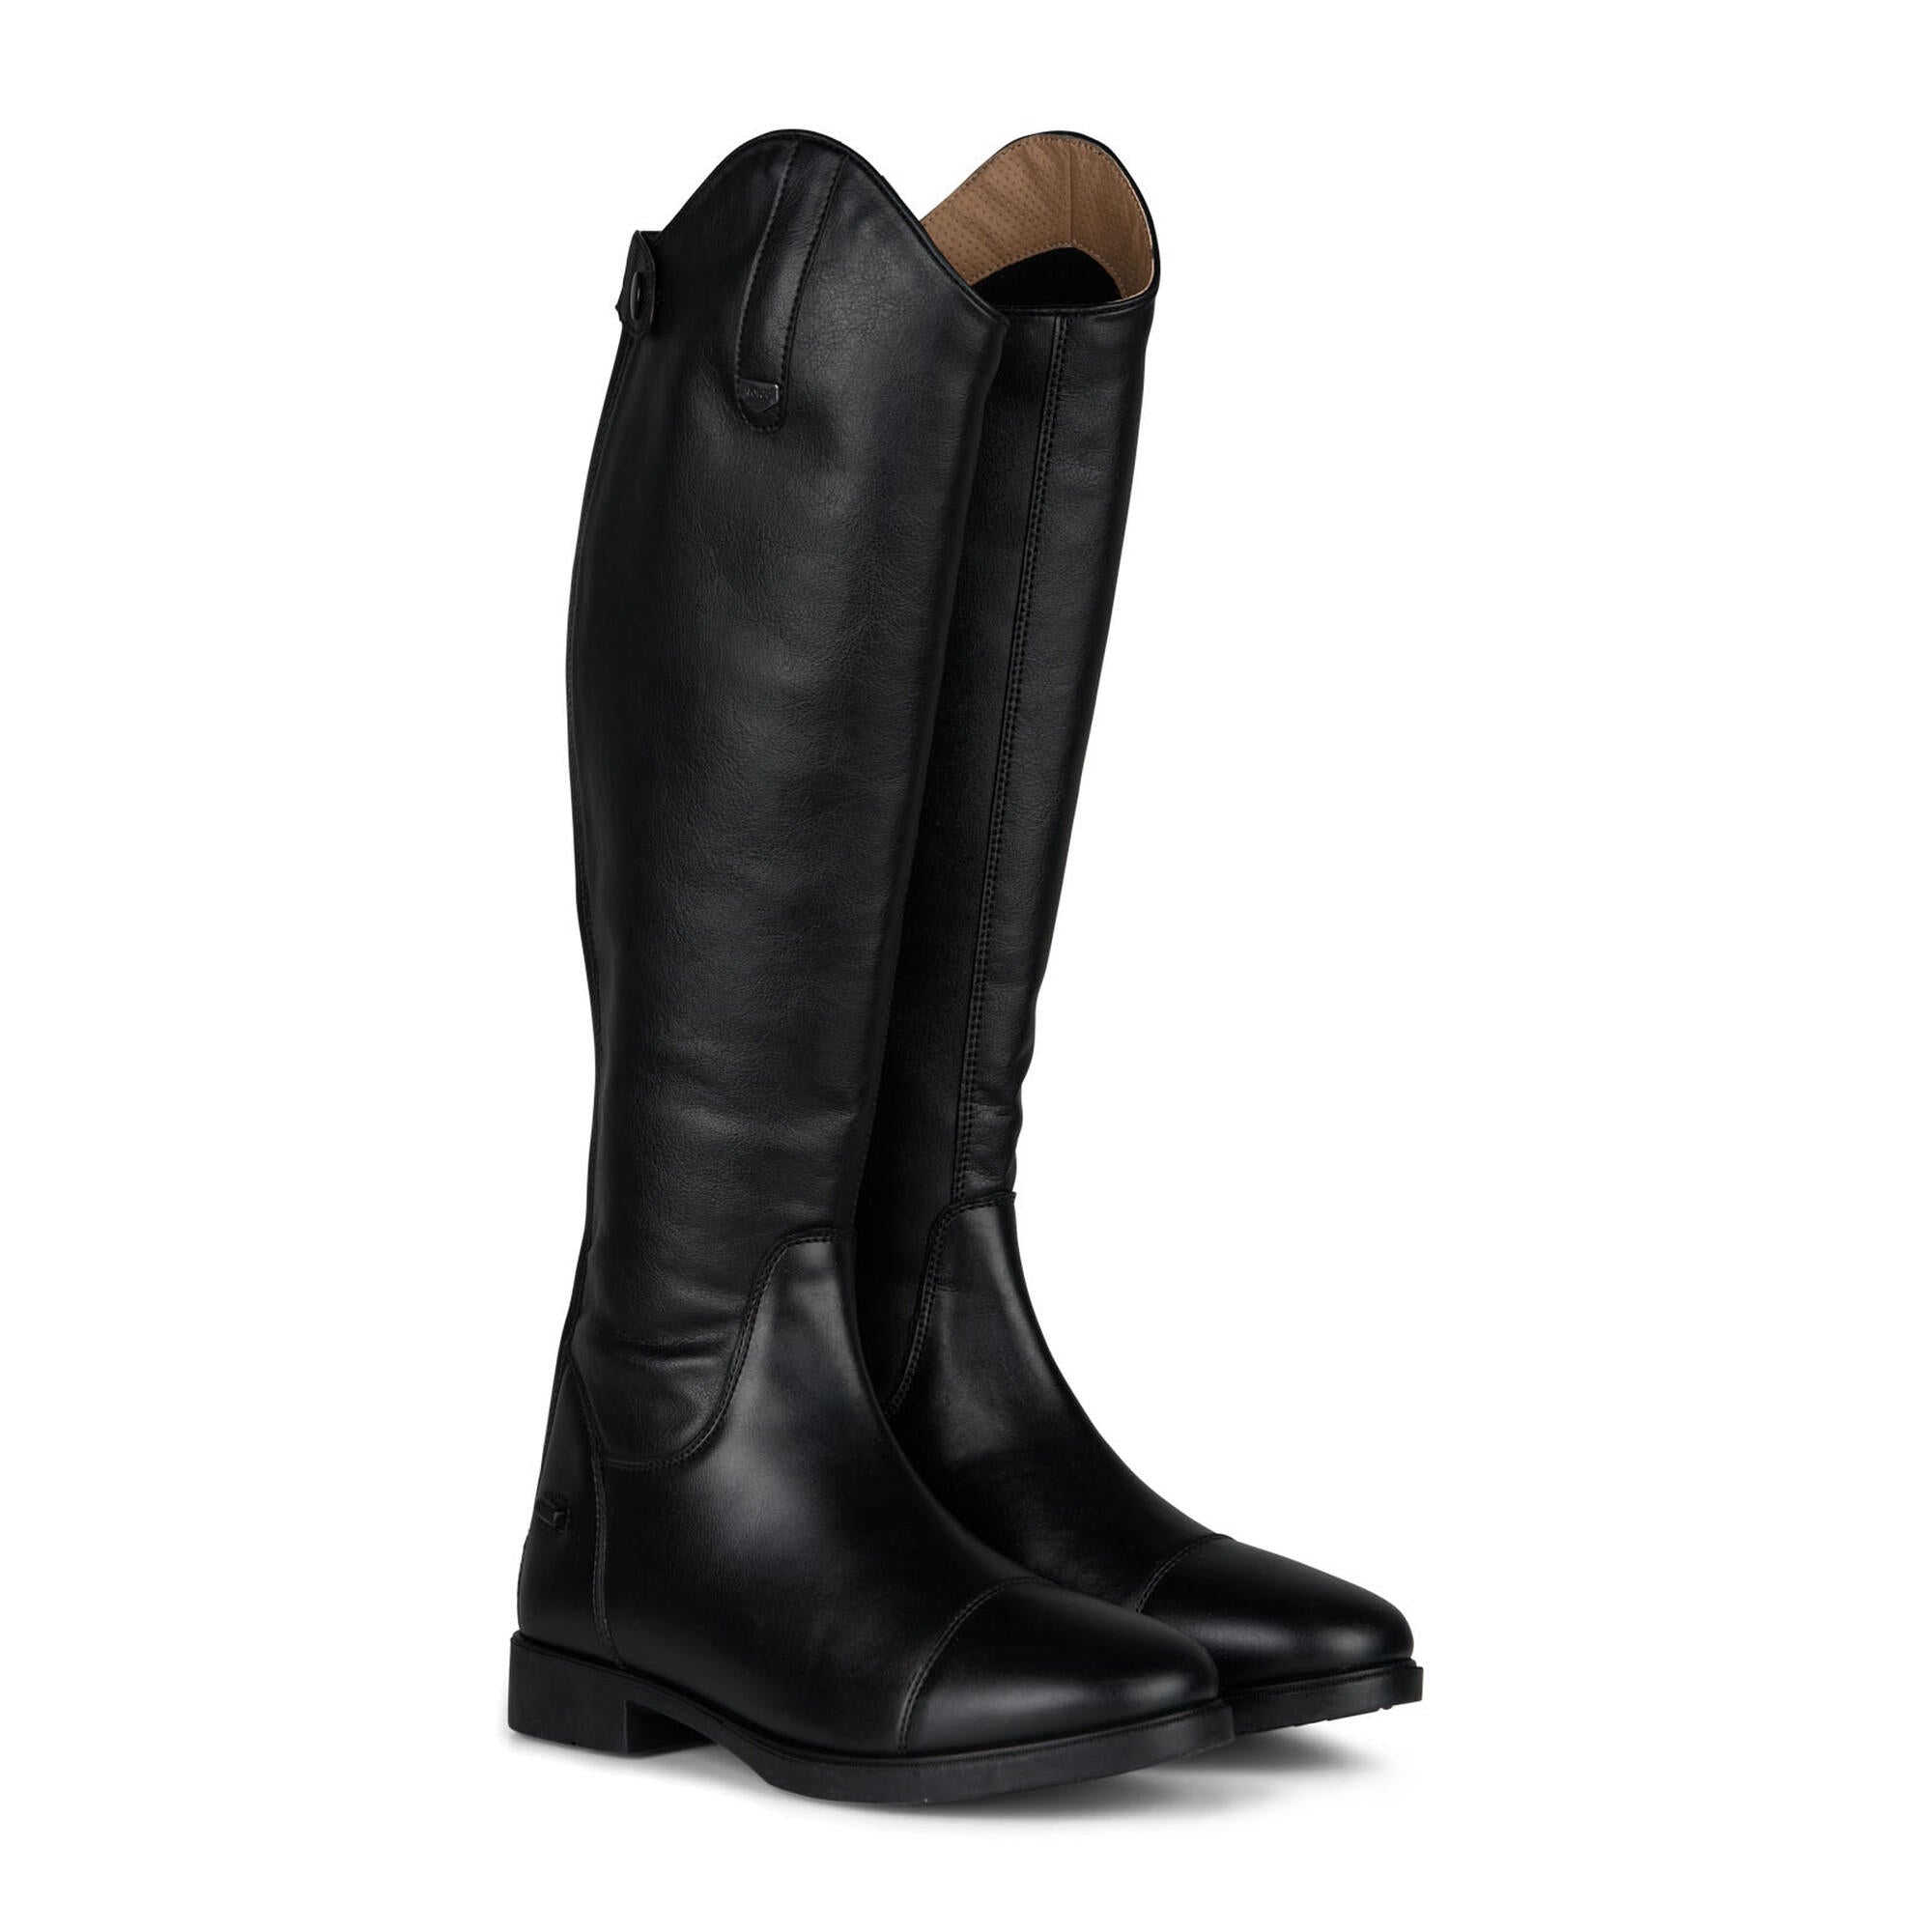 HZ Rover Black Tall Dressage Boots -STOCK DUE LATE APRIL - PRE ORDER